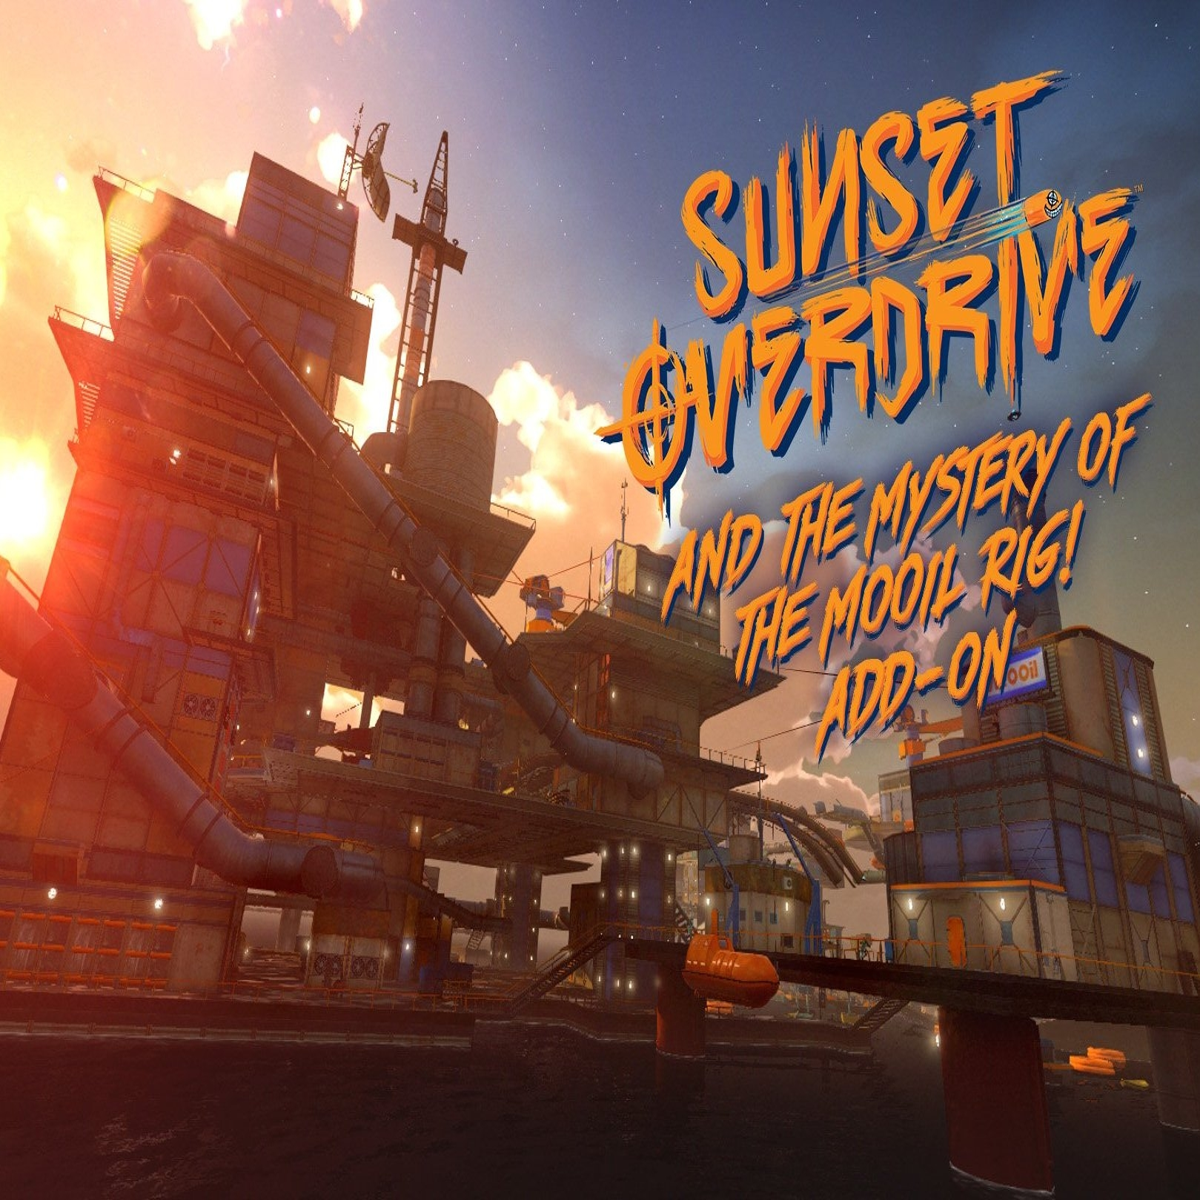 Sunset Overdrive: How A Remaster Could Fix Some of the Original